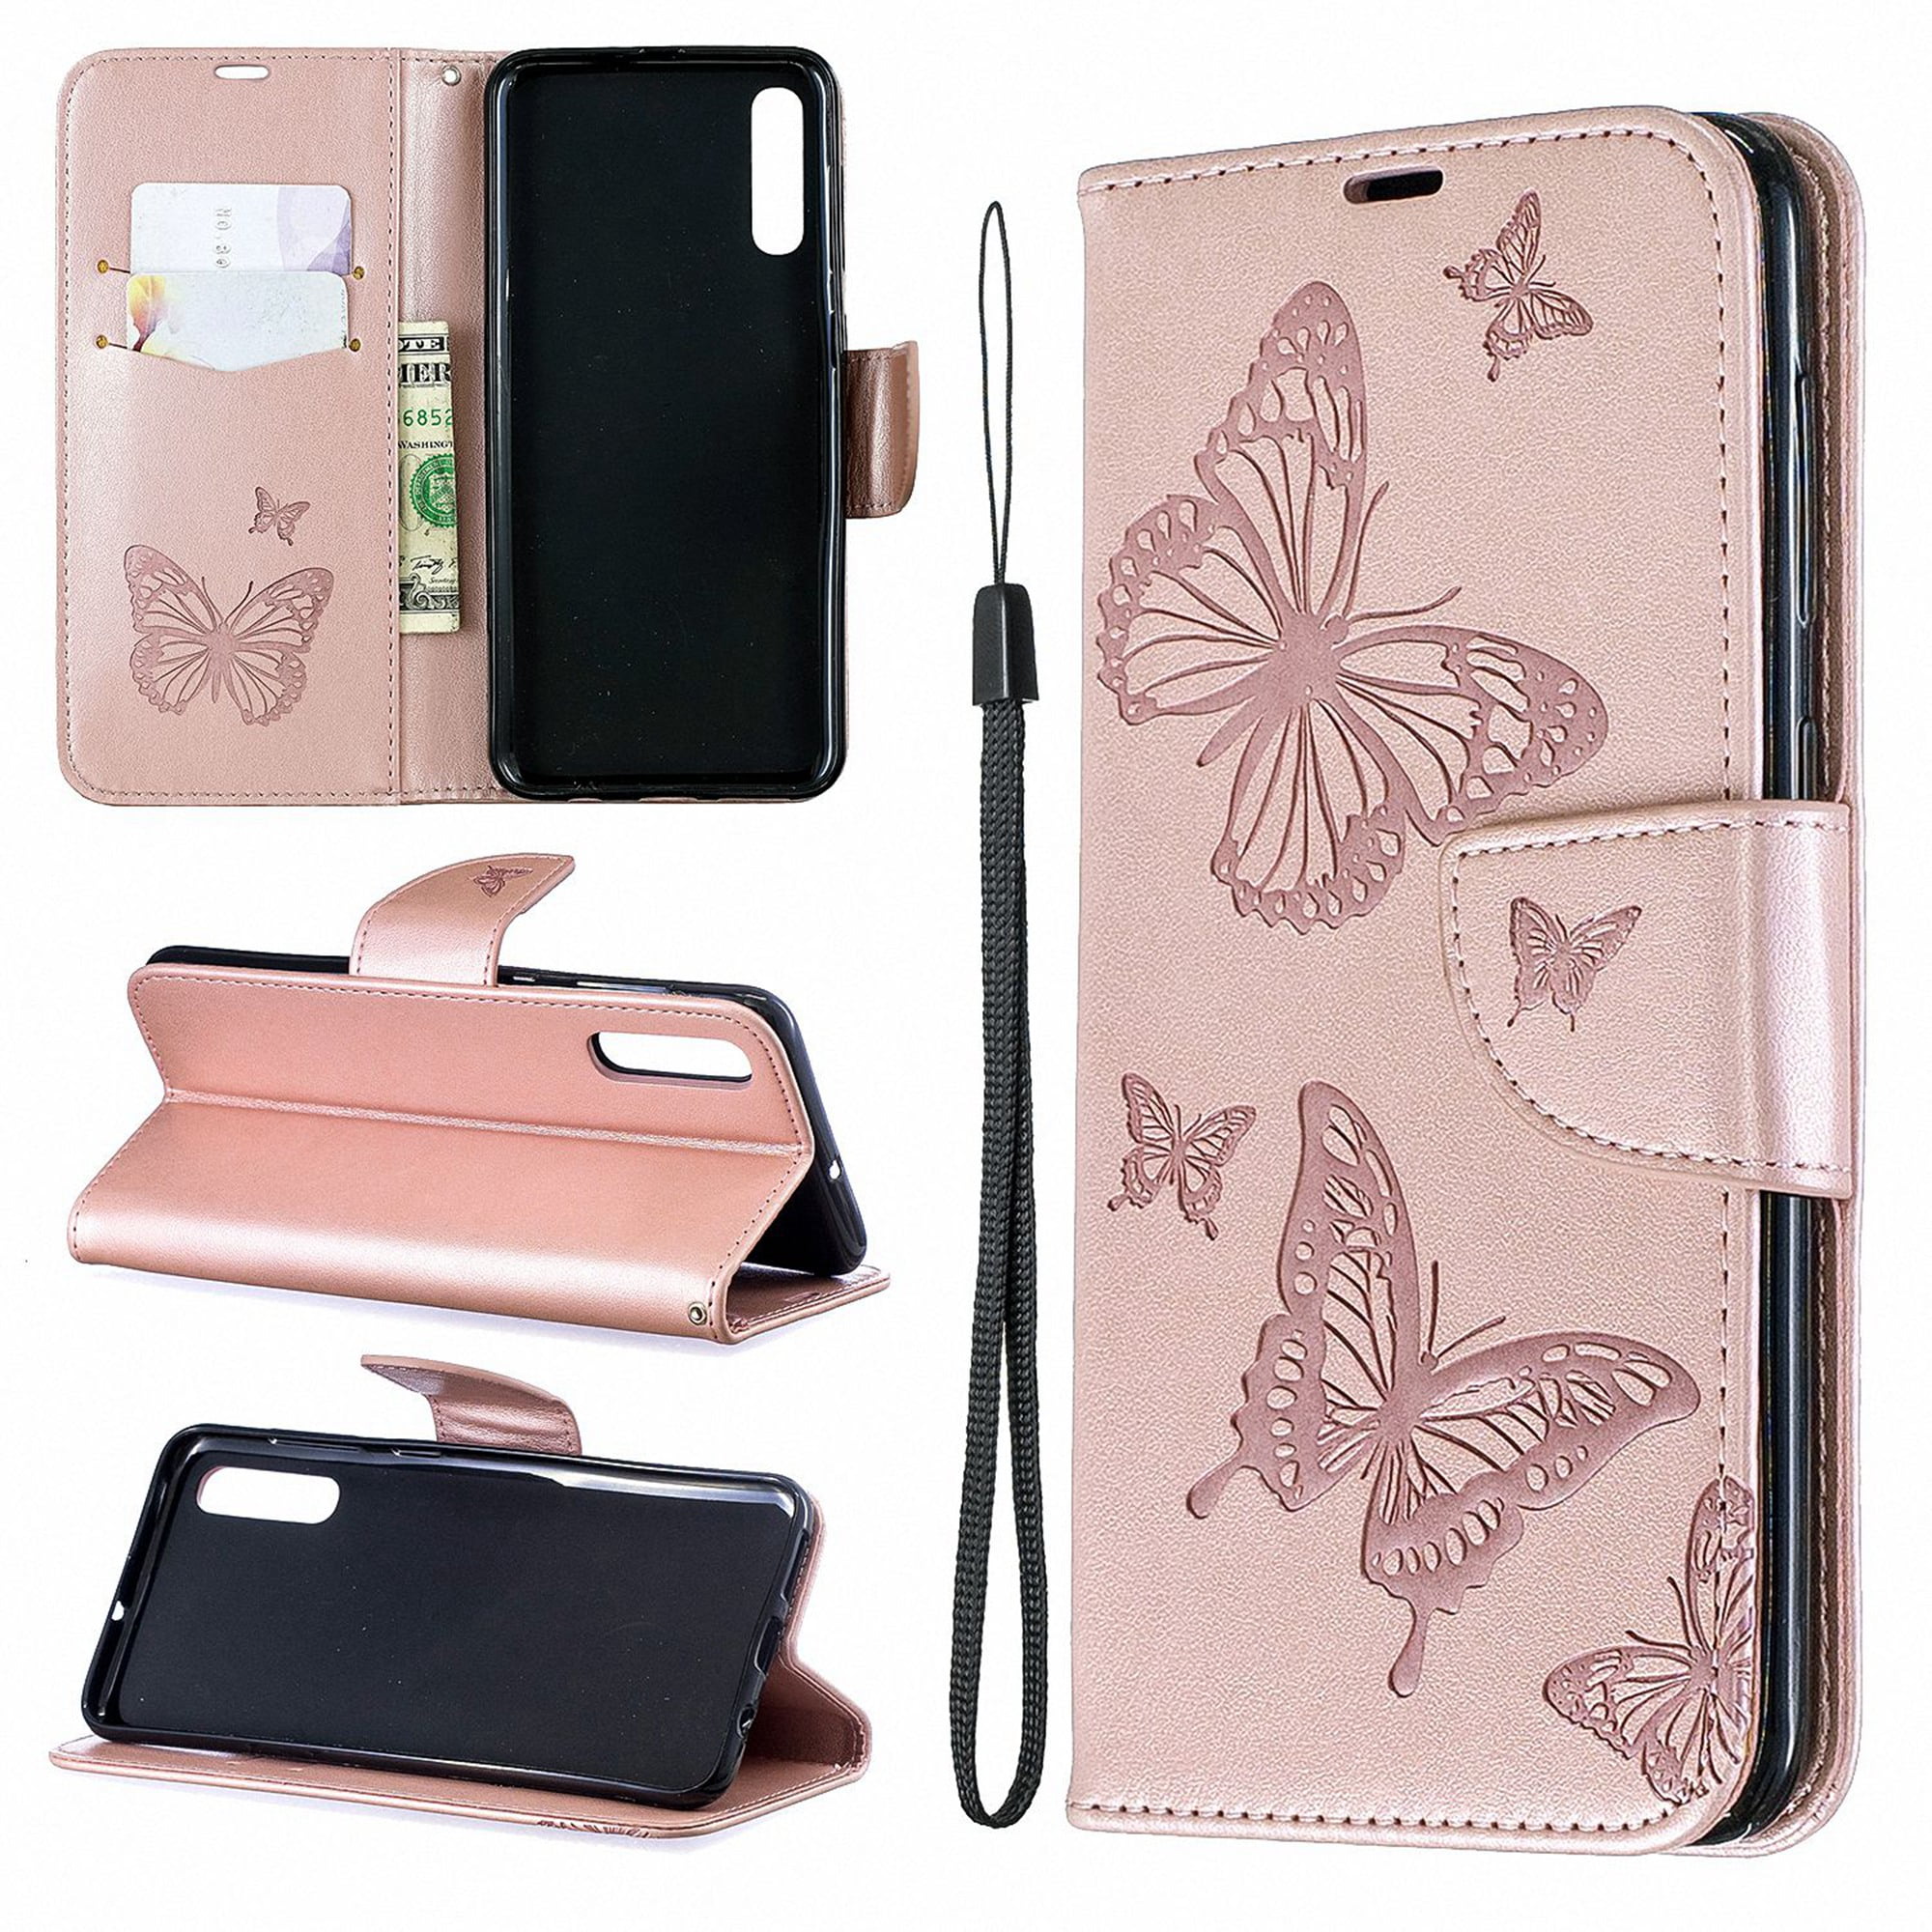 WIWJ Compatible with Samsung Galaxy A50 Case,Flower Butterfly 3D Embossed PU Leather Case with Card Holder Wallet Cover Flip Case Cover for Samsung Galaxy A50-Rose Gold 